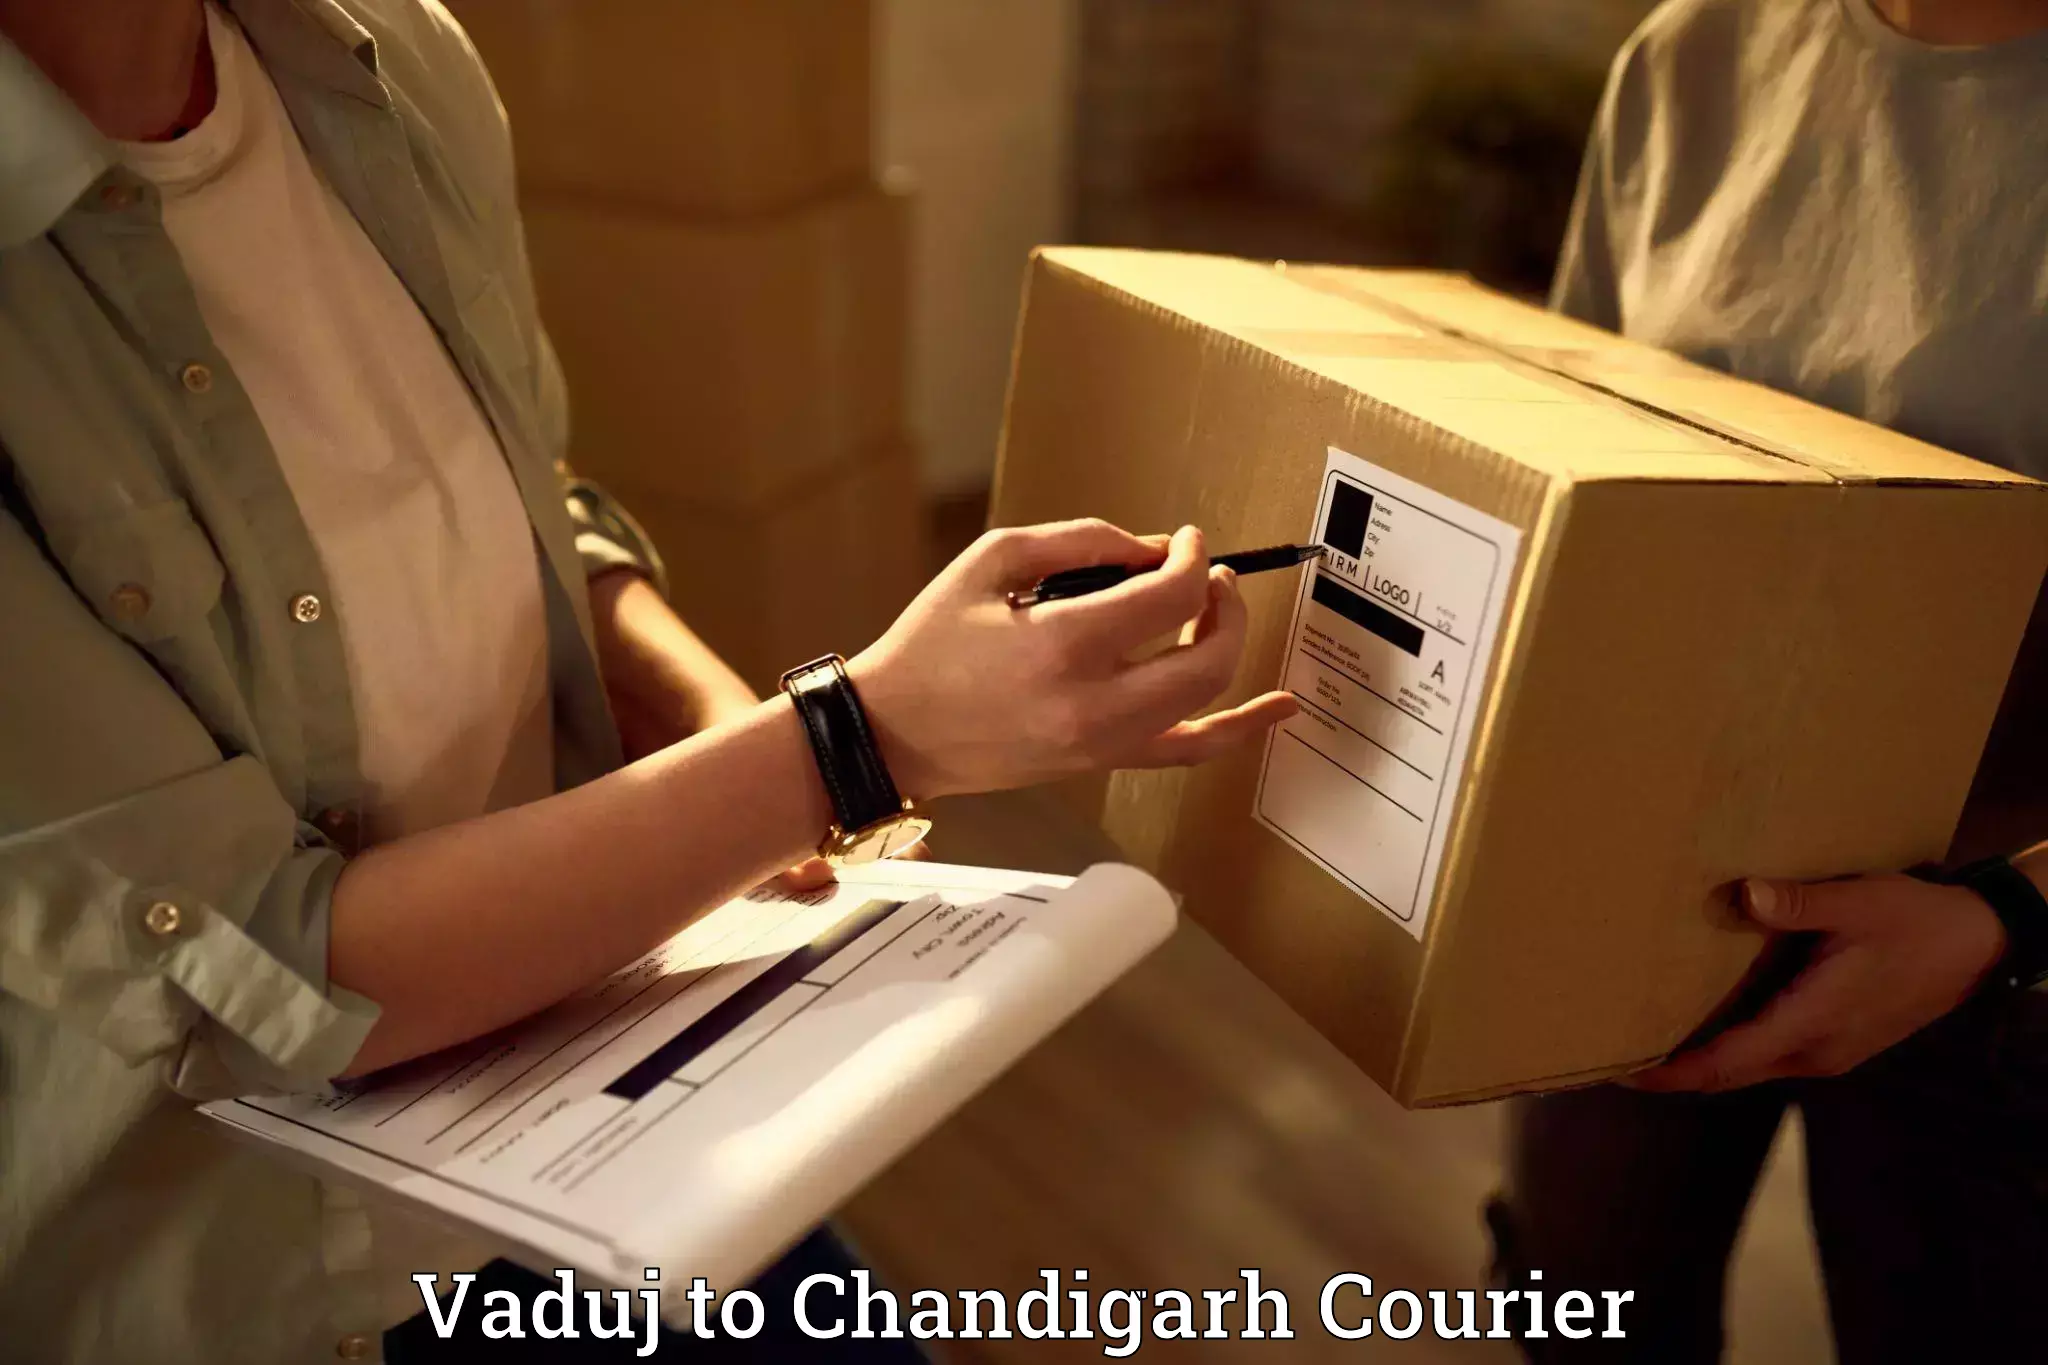 Furniture delivery service Vaduj to Chandigarh